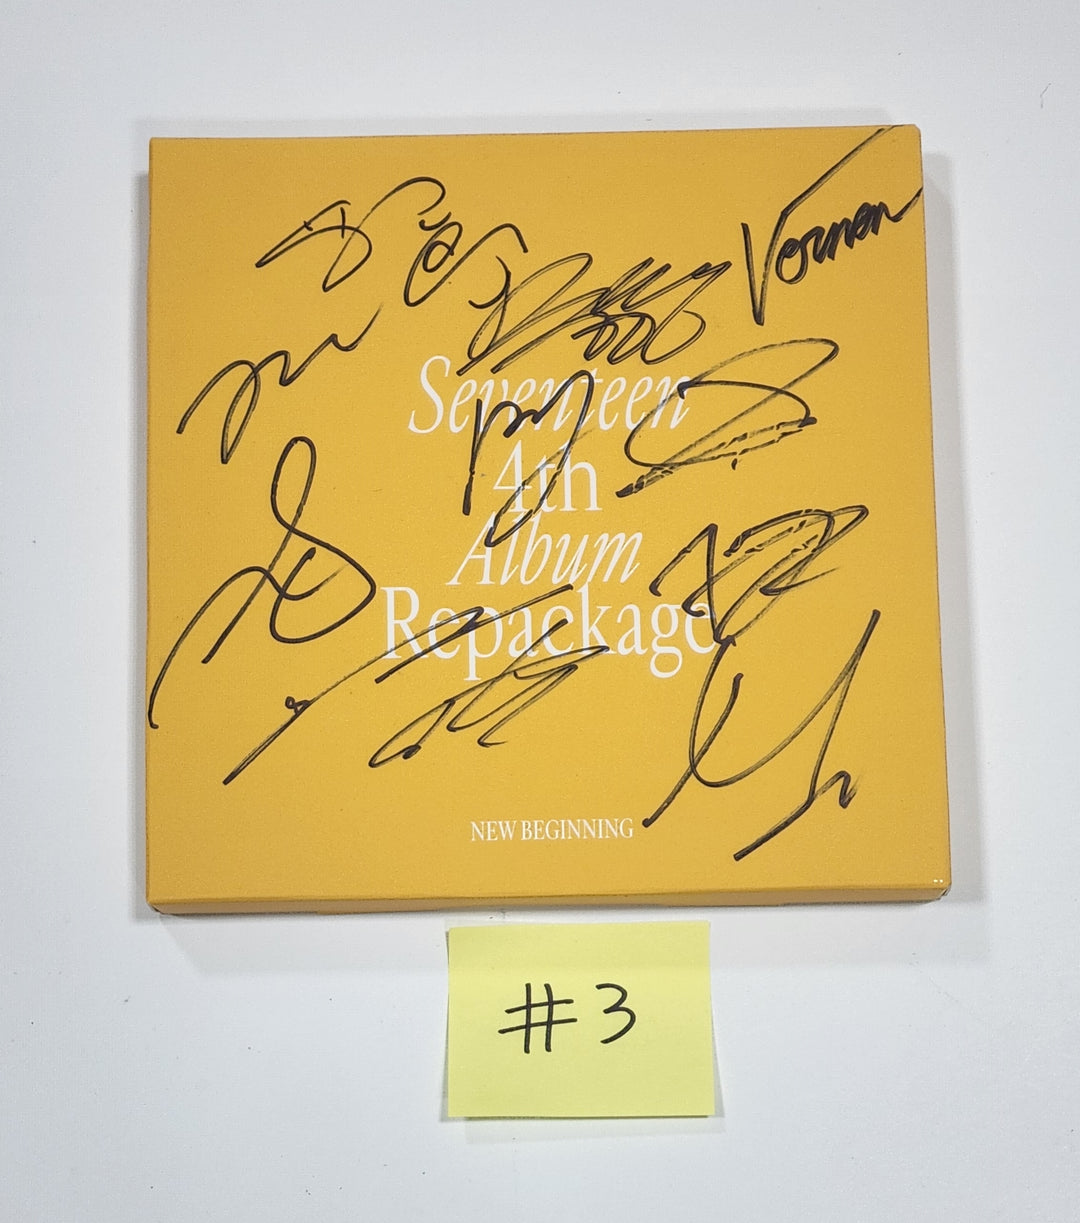 Seventeen 4th Album Repackage "SECTOR 17" - Hand Autographed(Signed) Promo Album